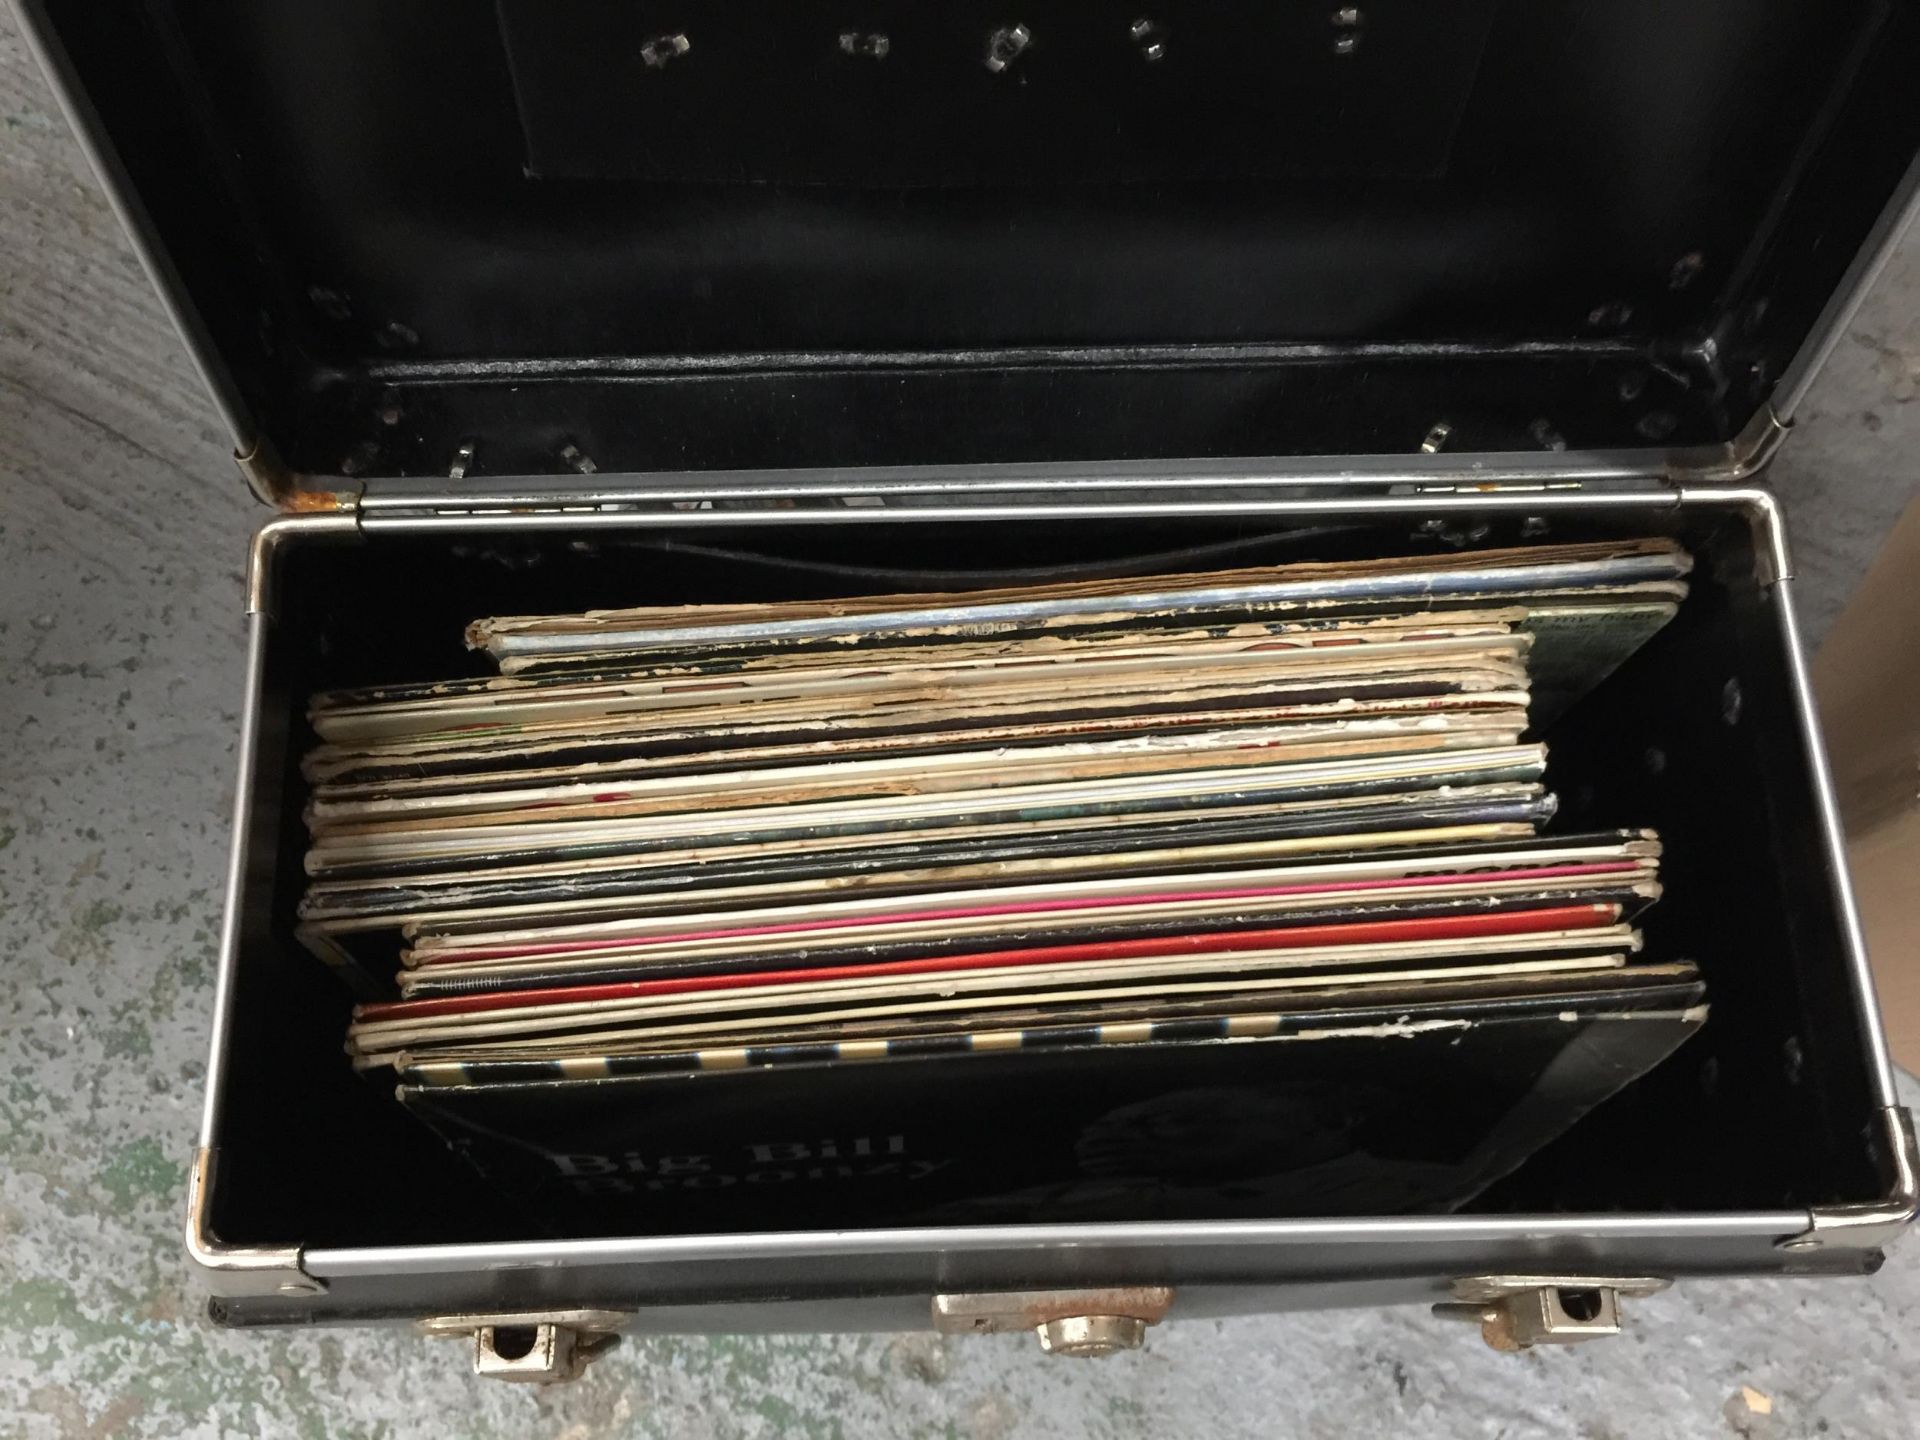 A COLLECTION OF LP RECORDS, DAVID BOWIE, THE BEACH BOYS, IN A STORAGE CASE - Image 2 of 5